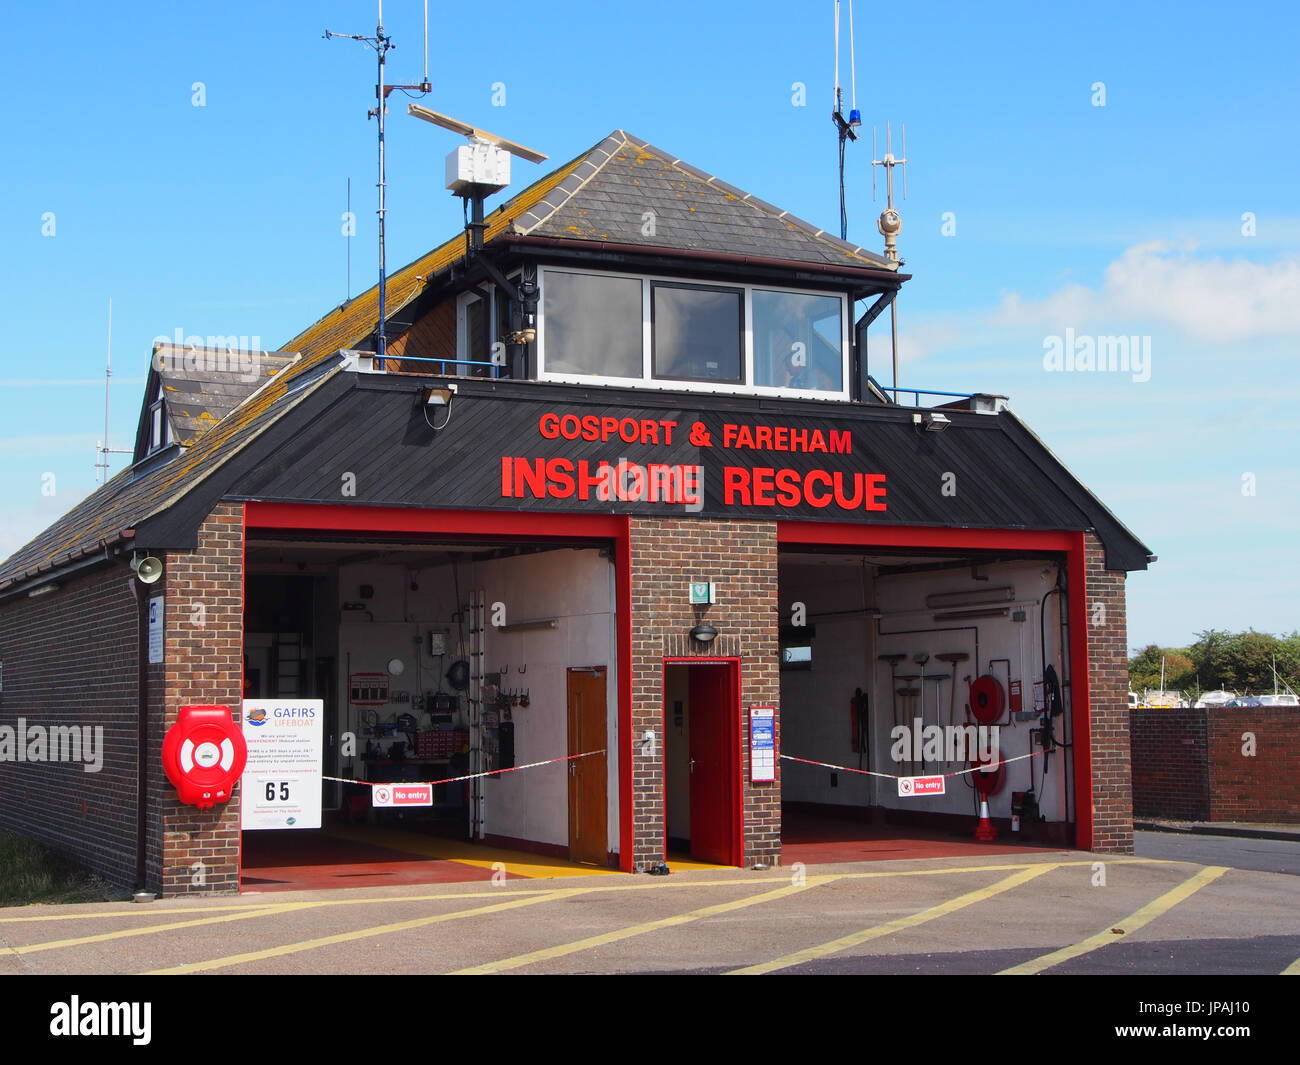 Gosport And Fareham Inshore Rescue Service (GAFIRS) lifeboat station, Stock Photo